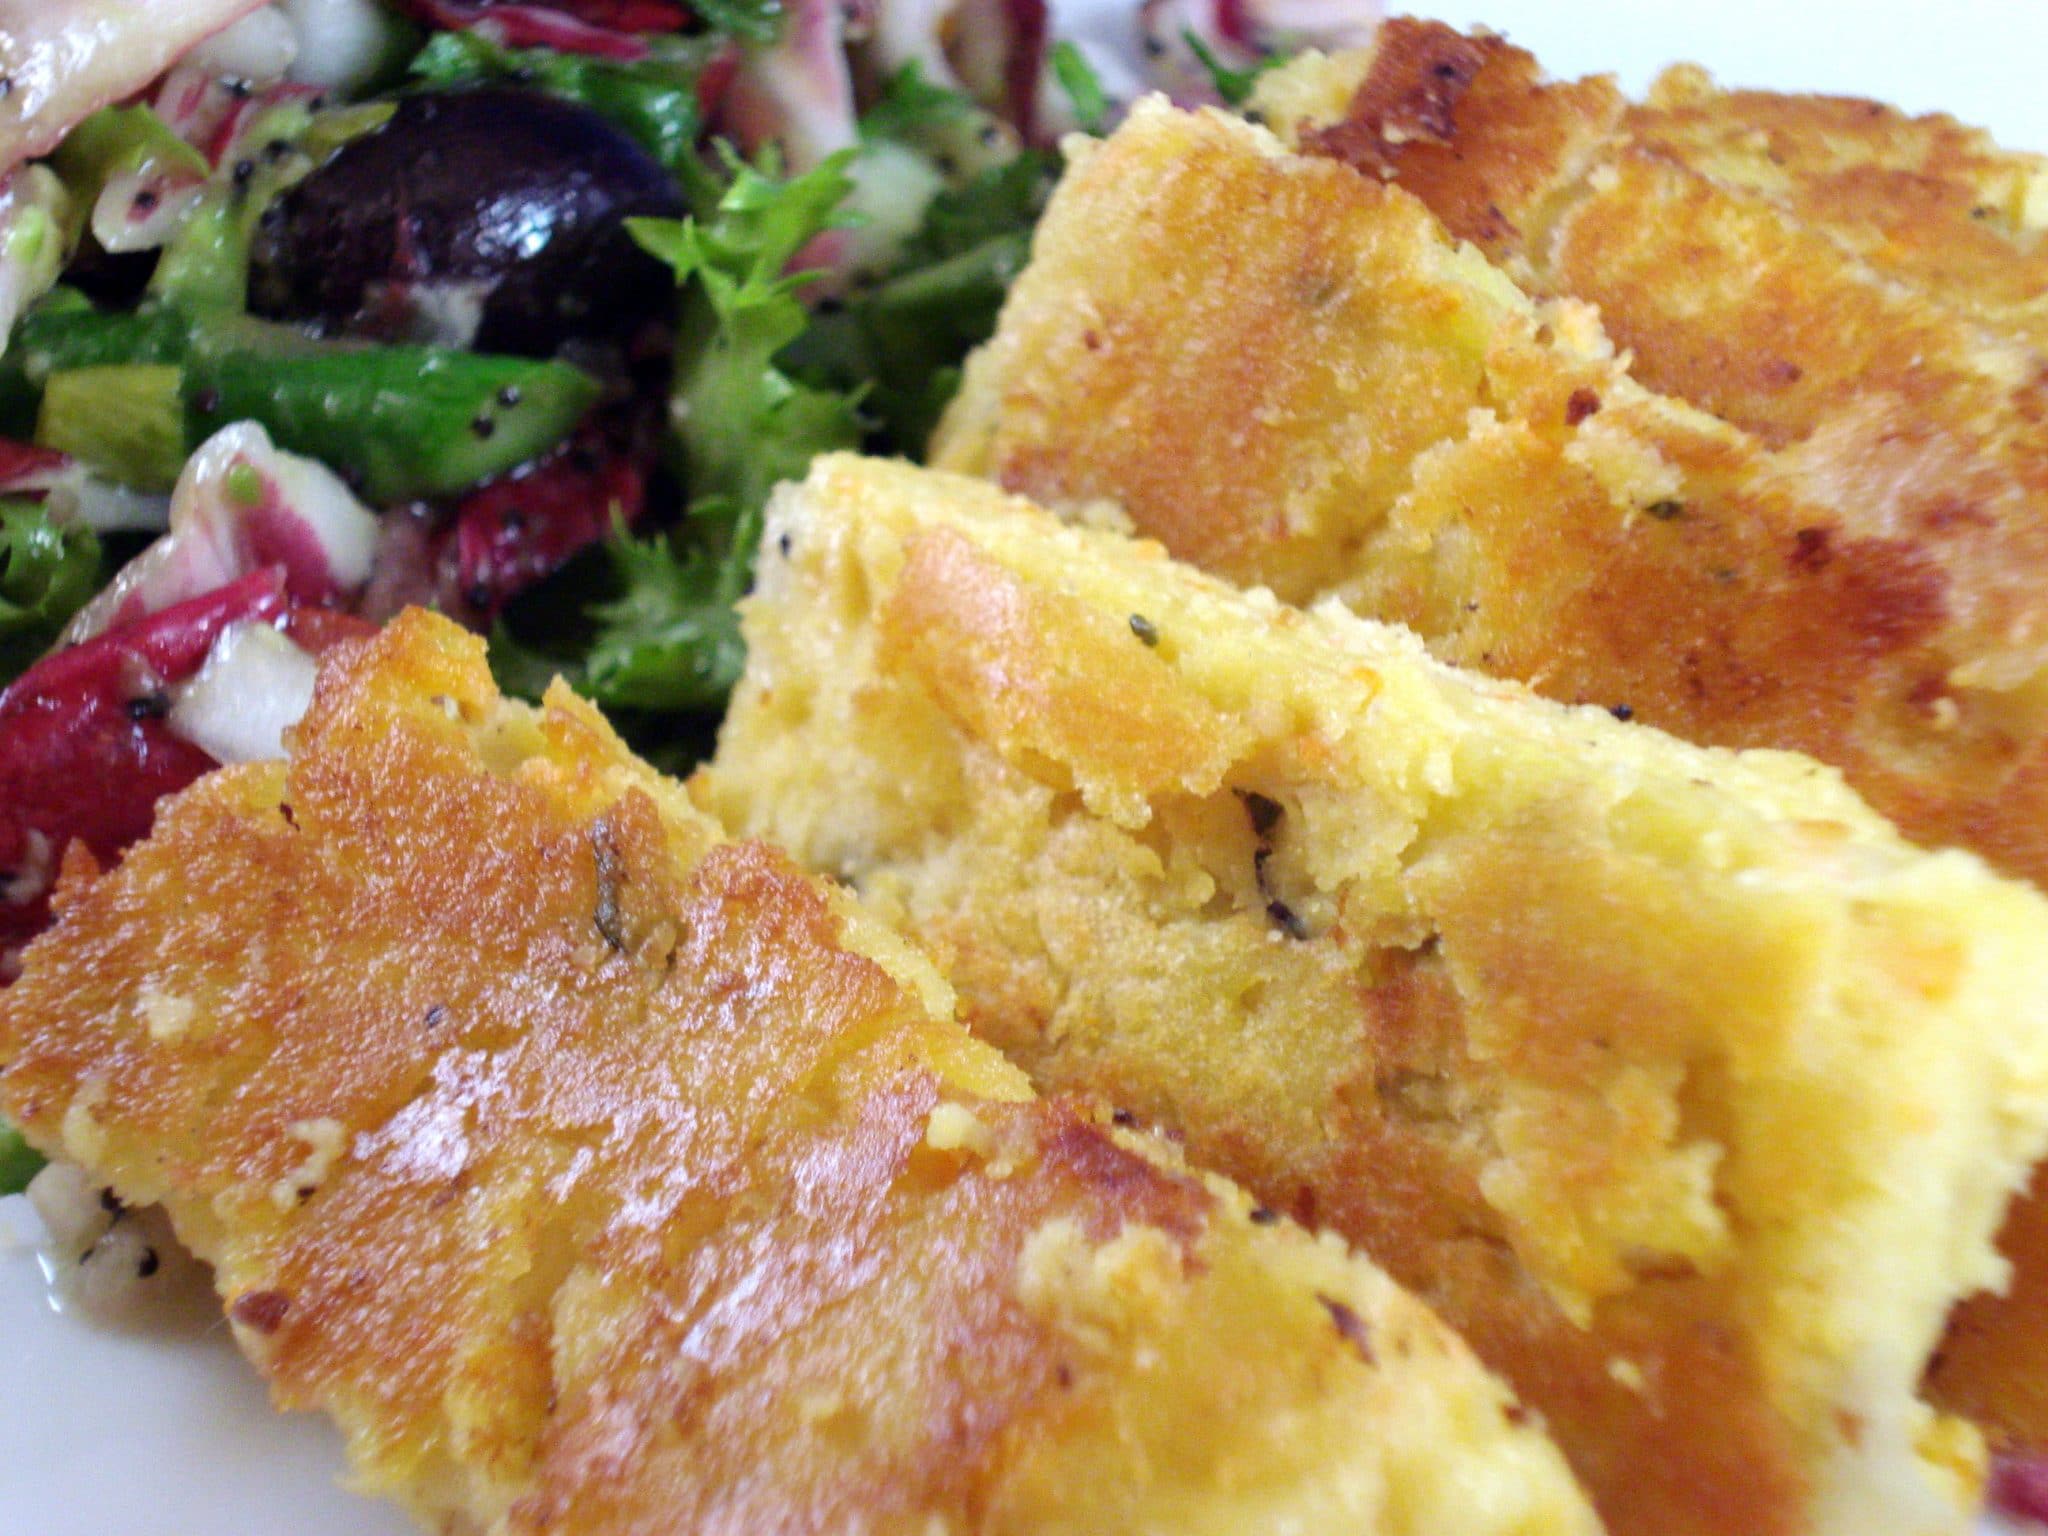 Crispy Chickpea Fritters with side salad